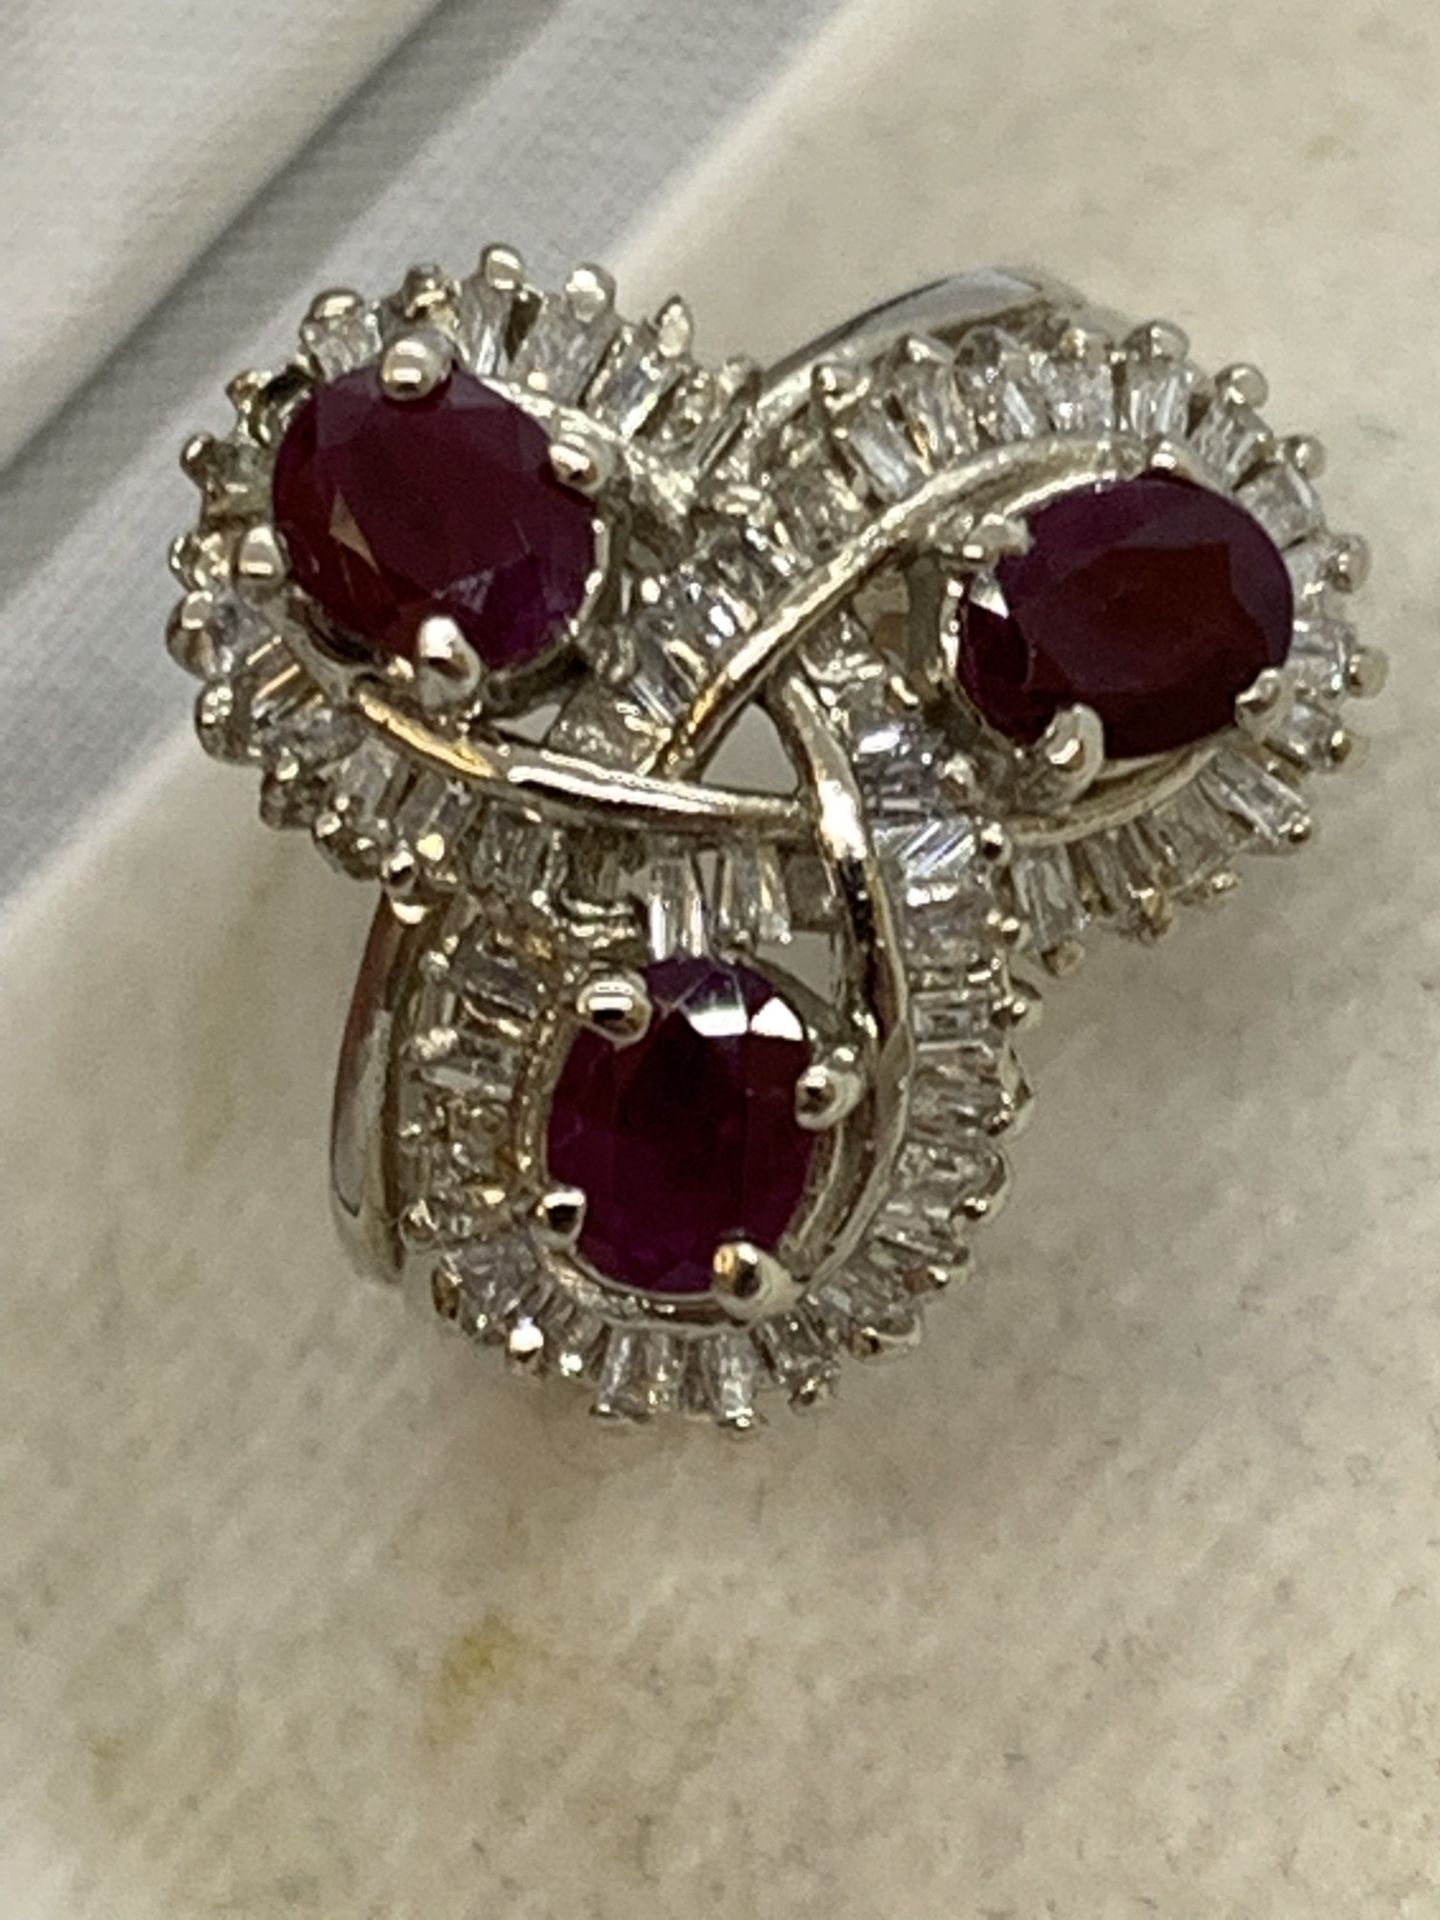 TRIPLE RUBY & DIAMOND SET RING IN 14ct GOLD - 6.8g APPROX - SIZE M APPROX - Image 8 of 8